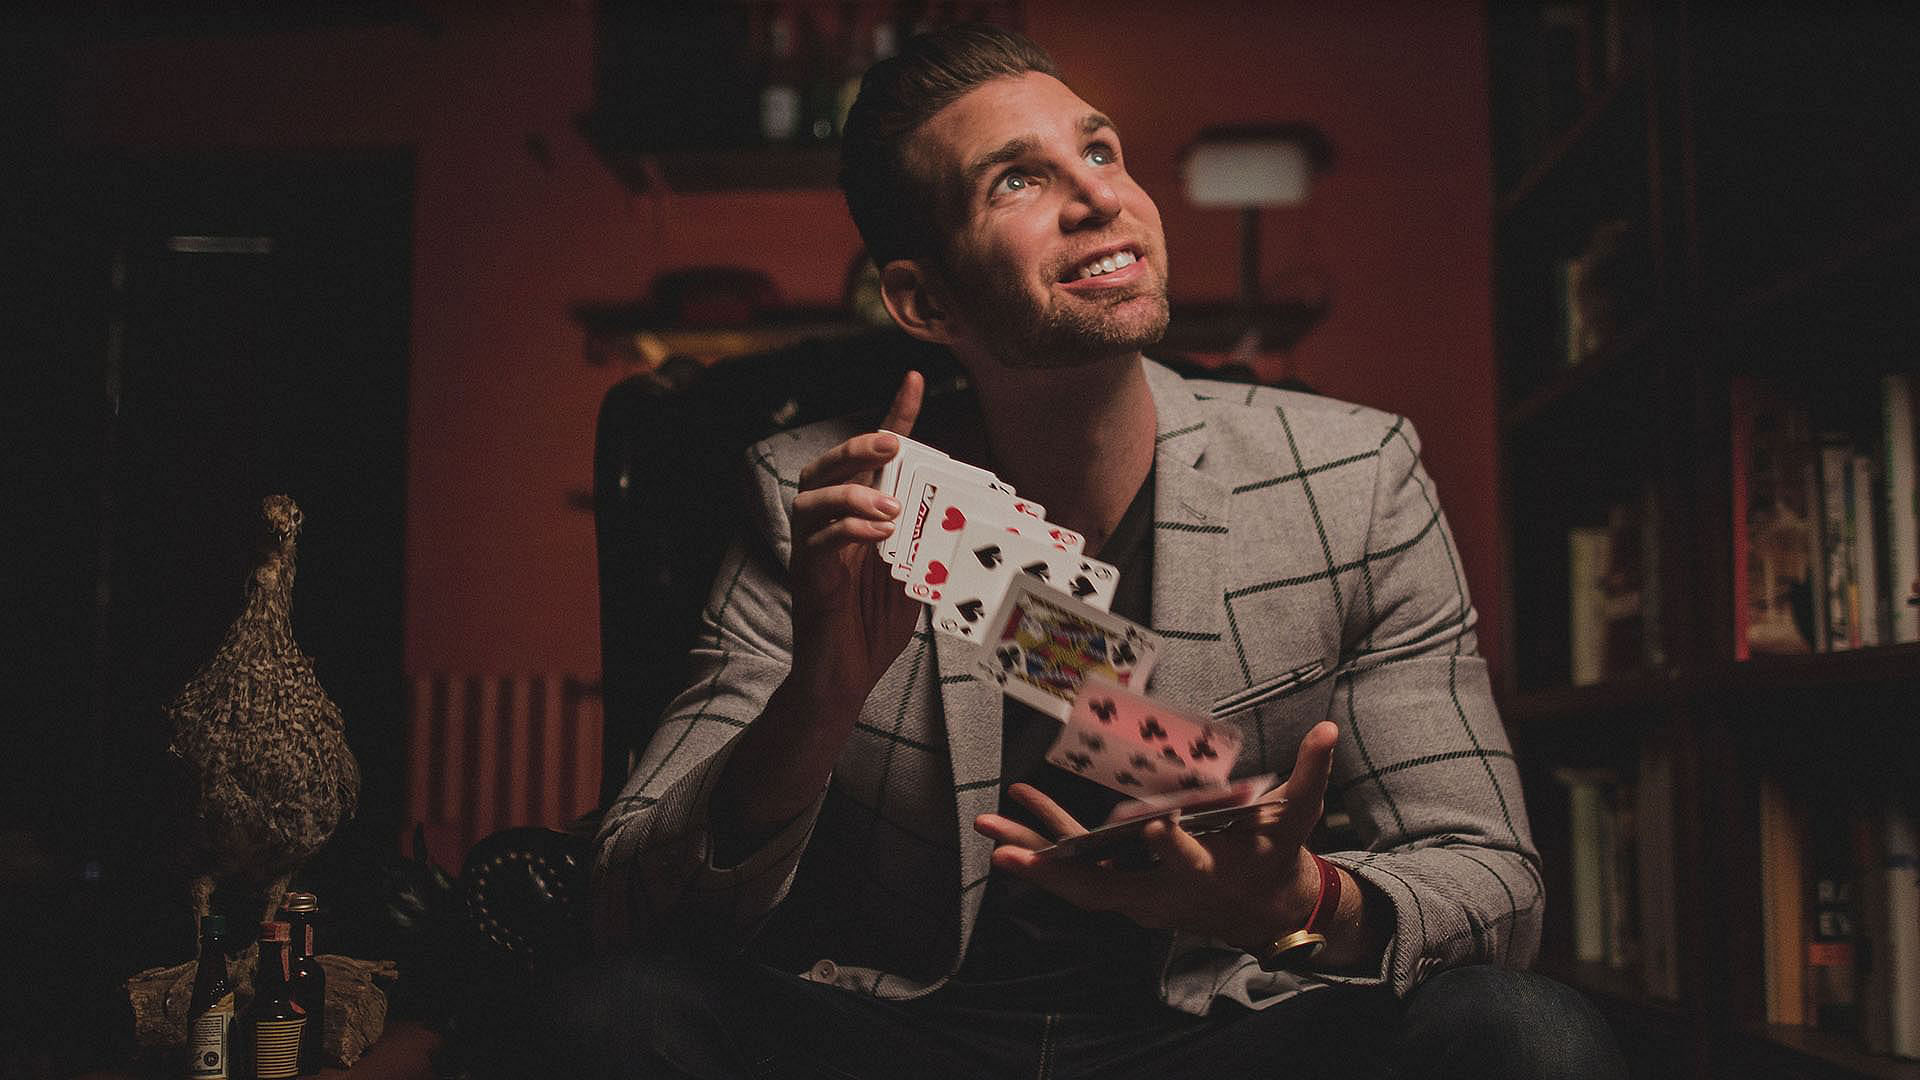 magician springing cards between their hands during a playing card spring flourish